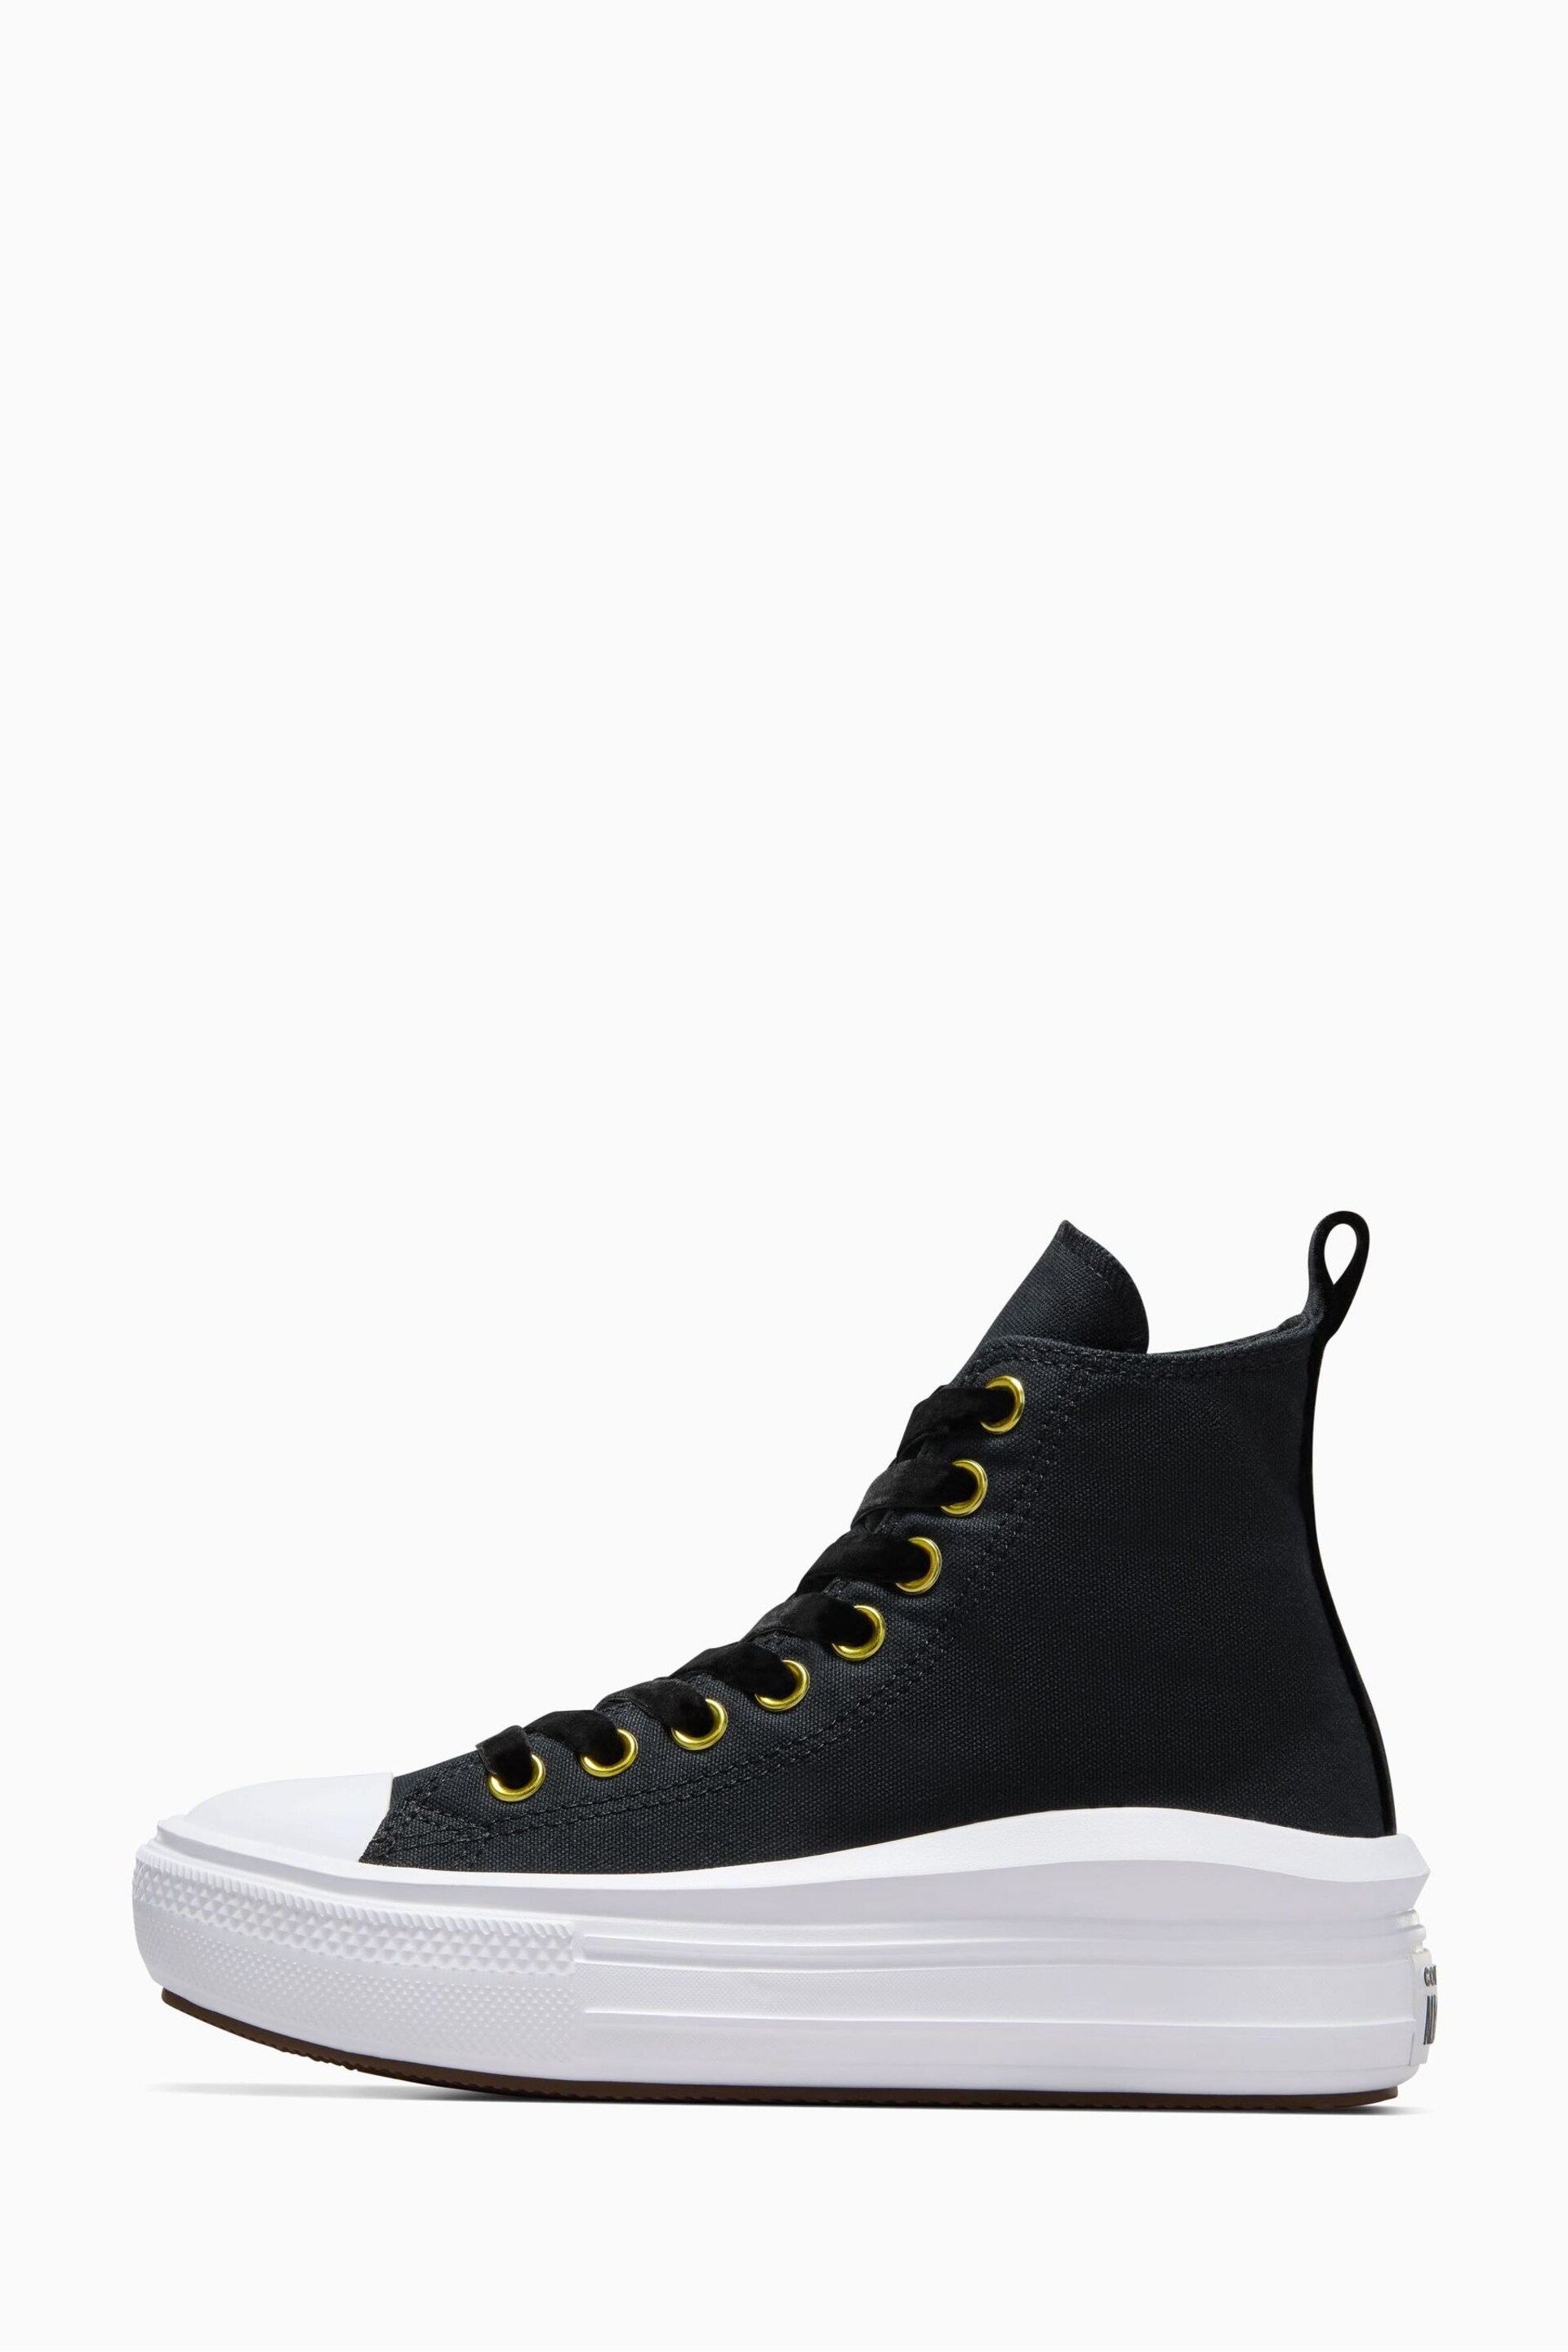 Converse Black Velvet Move Youth Trainers - Image 2 of 14